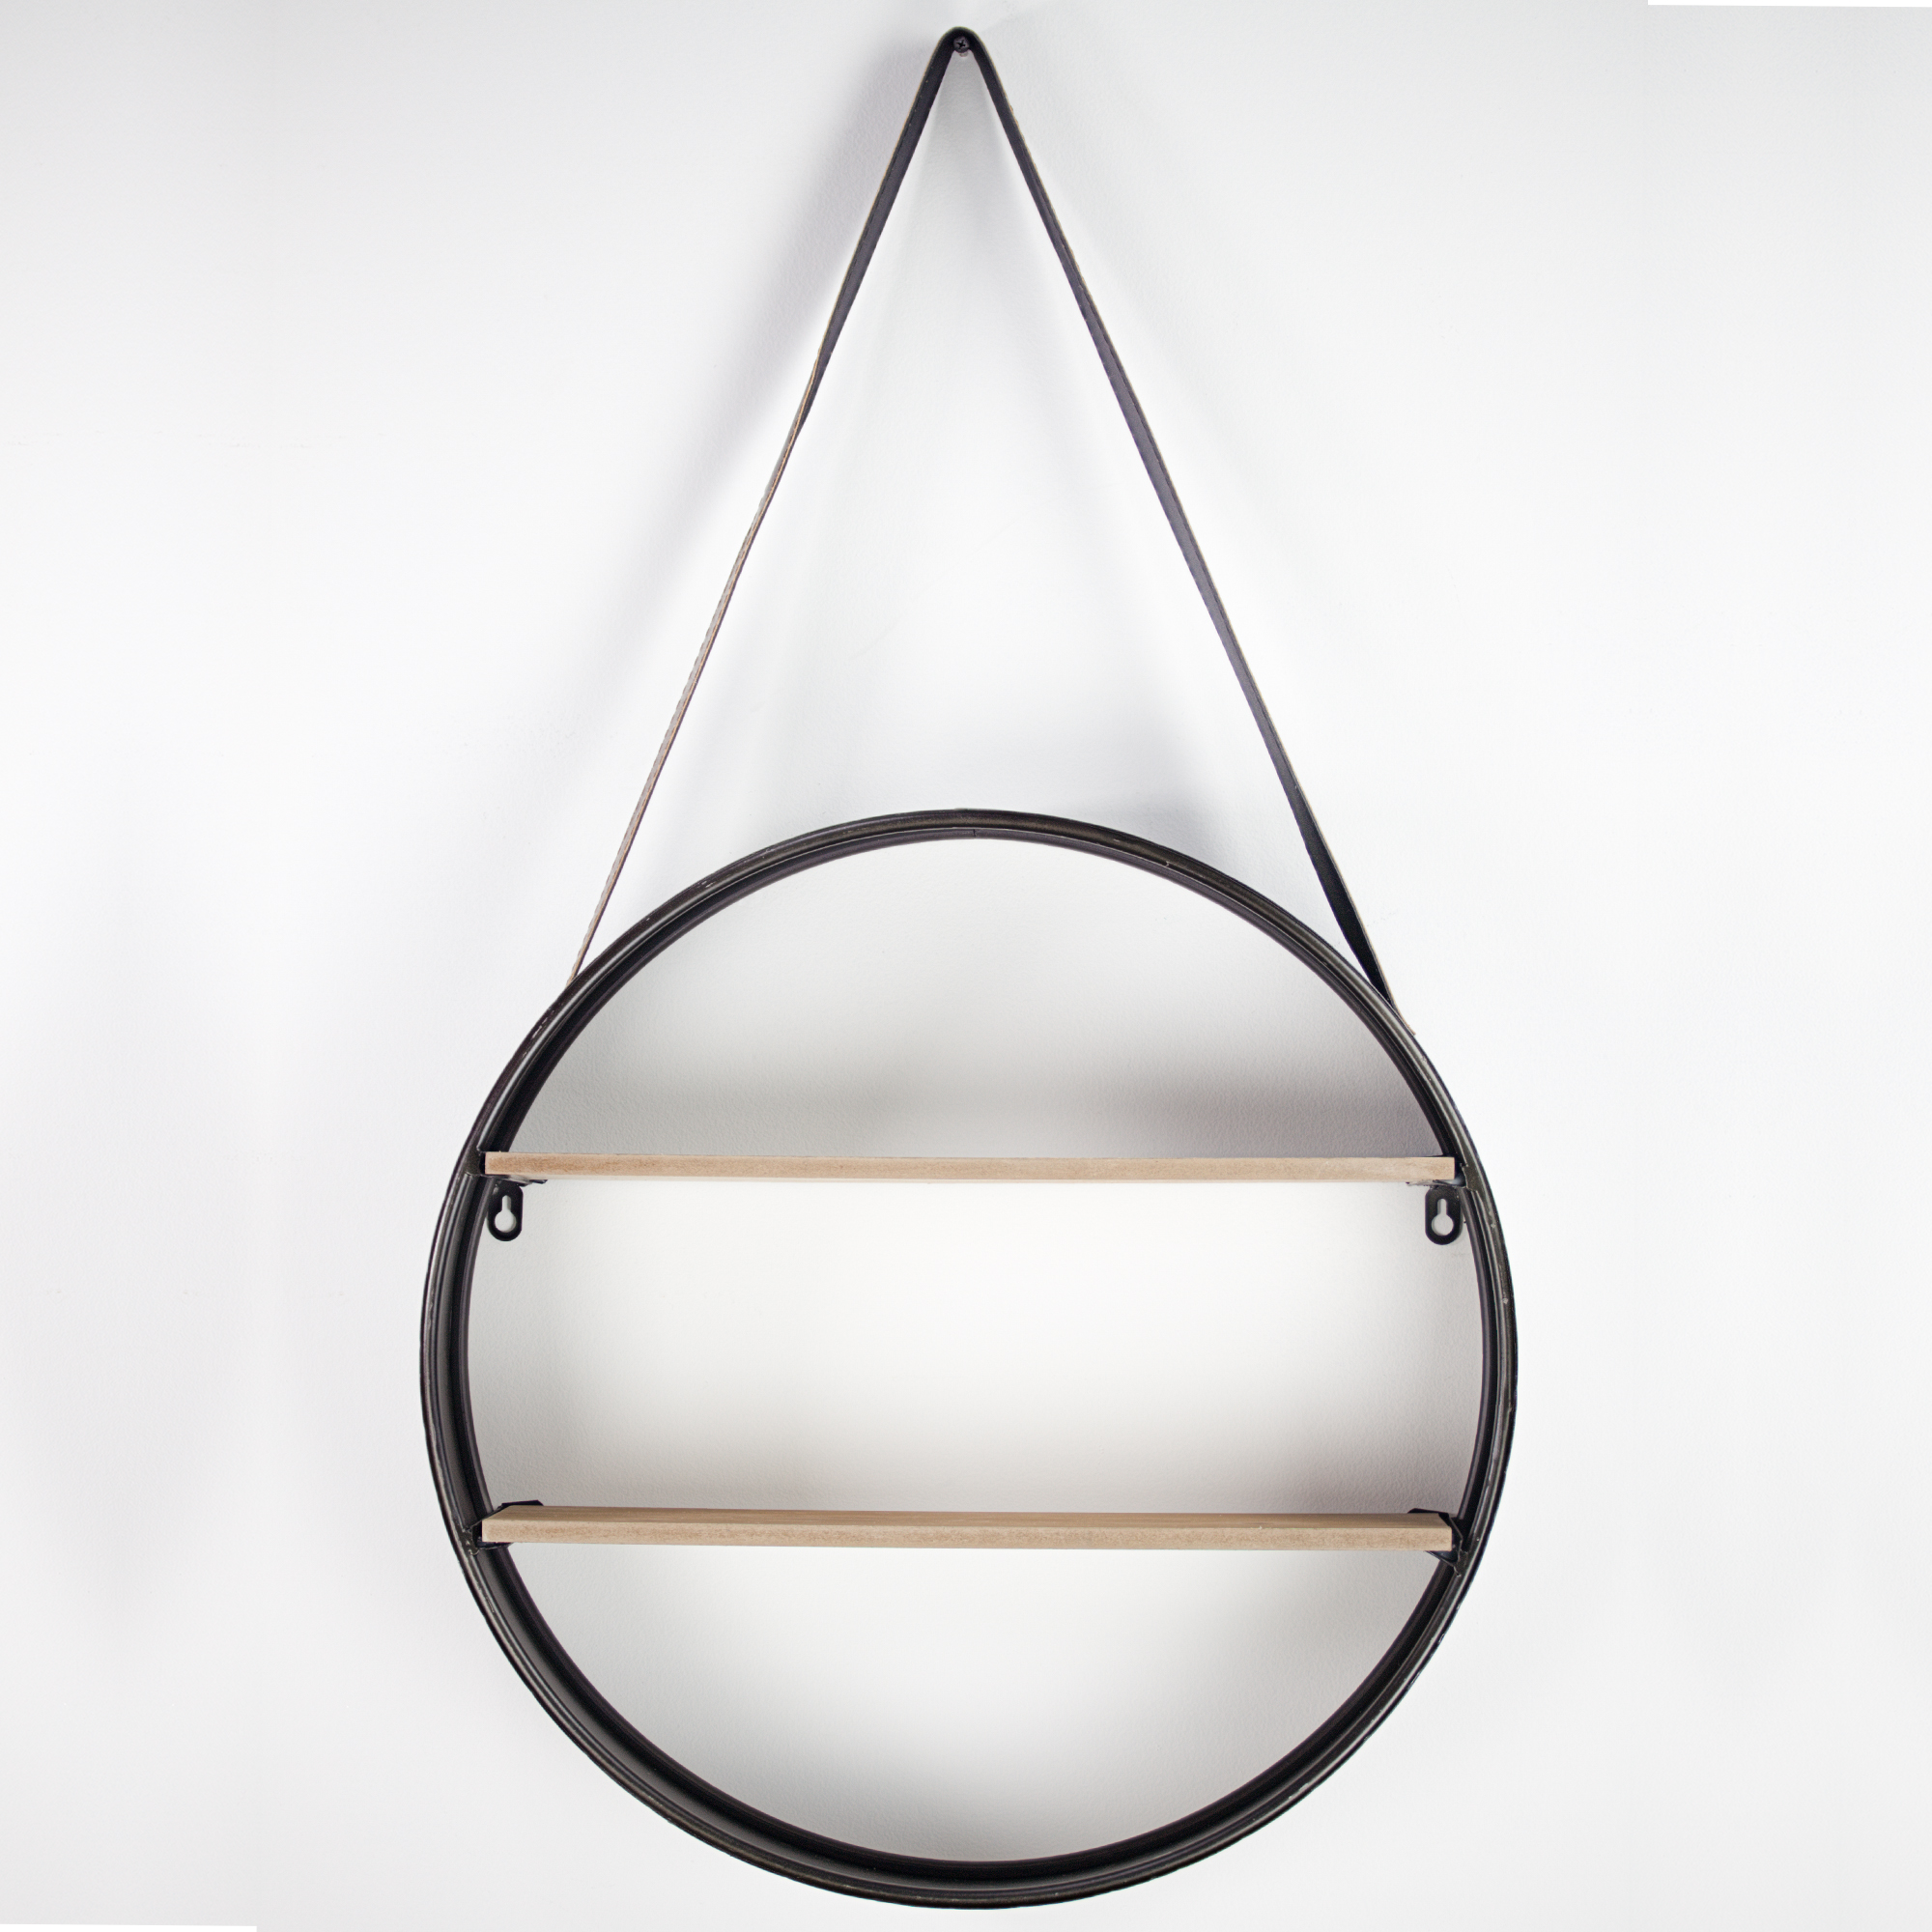 American Art Decor Metal and Wood Round Hanging Wall Shelf with Strap (33" x 19) - image 3 of 8